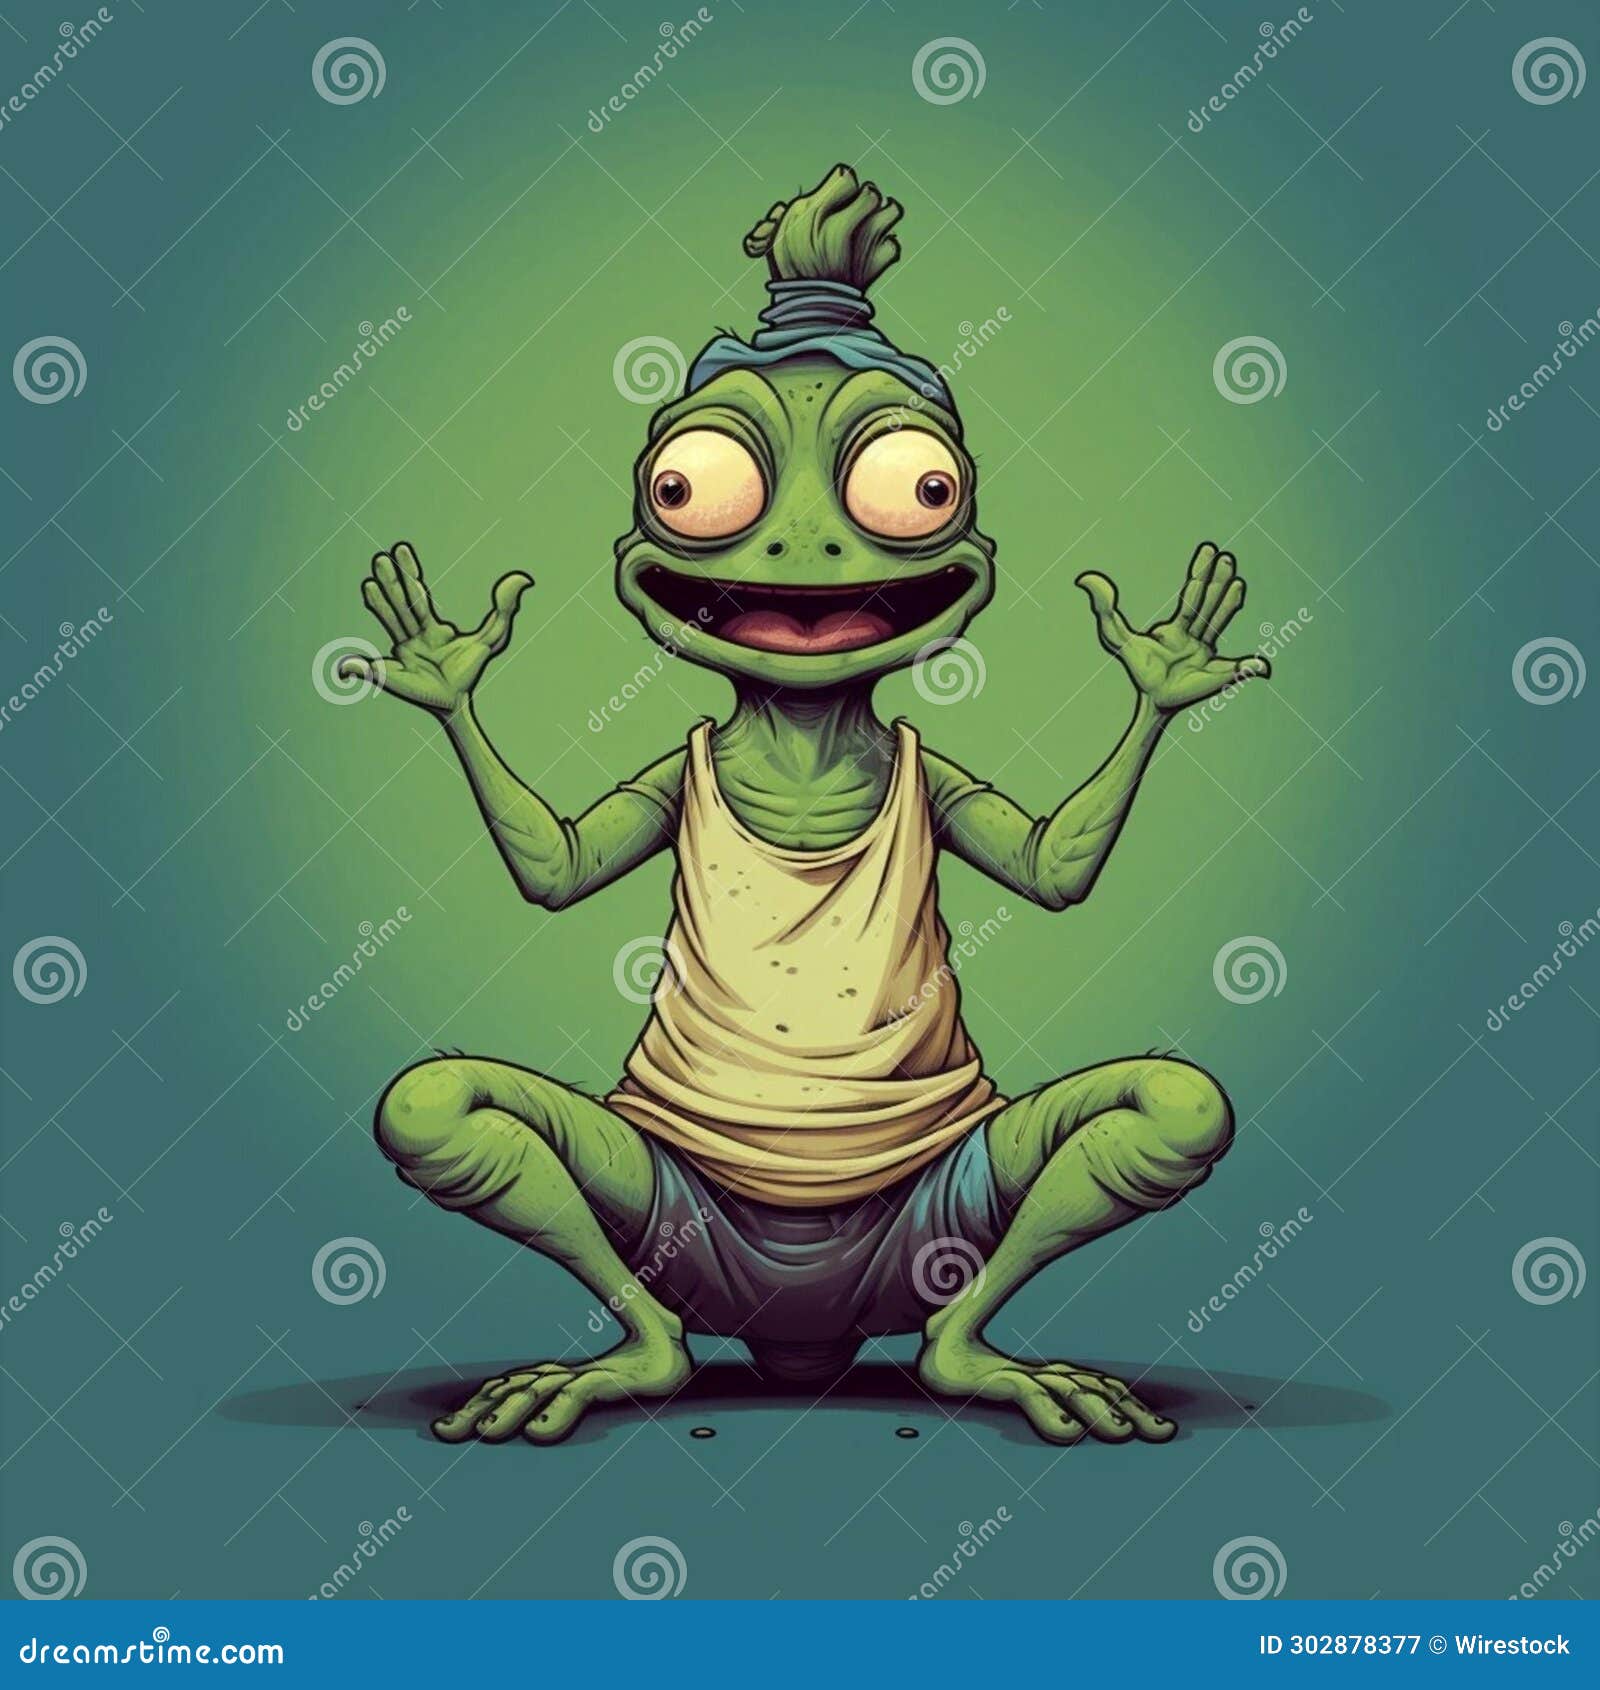 Cute happy frog sitting in a meditative pose Vector Image